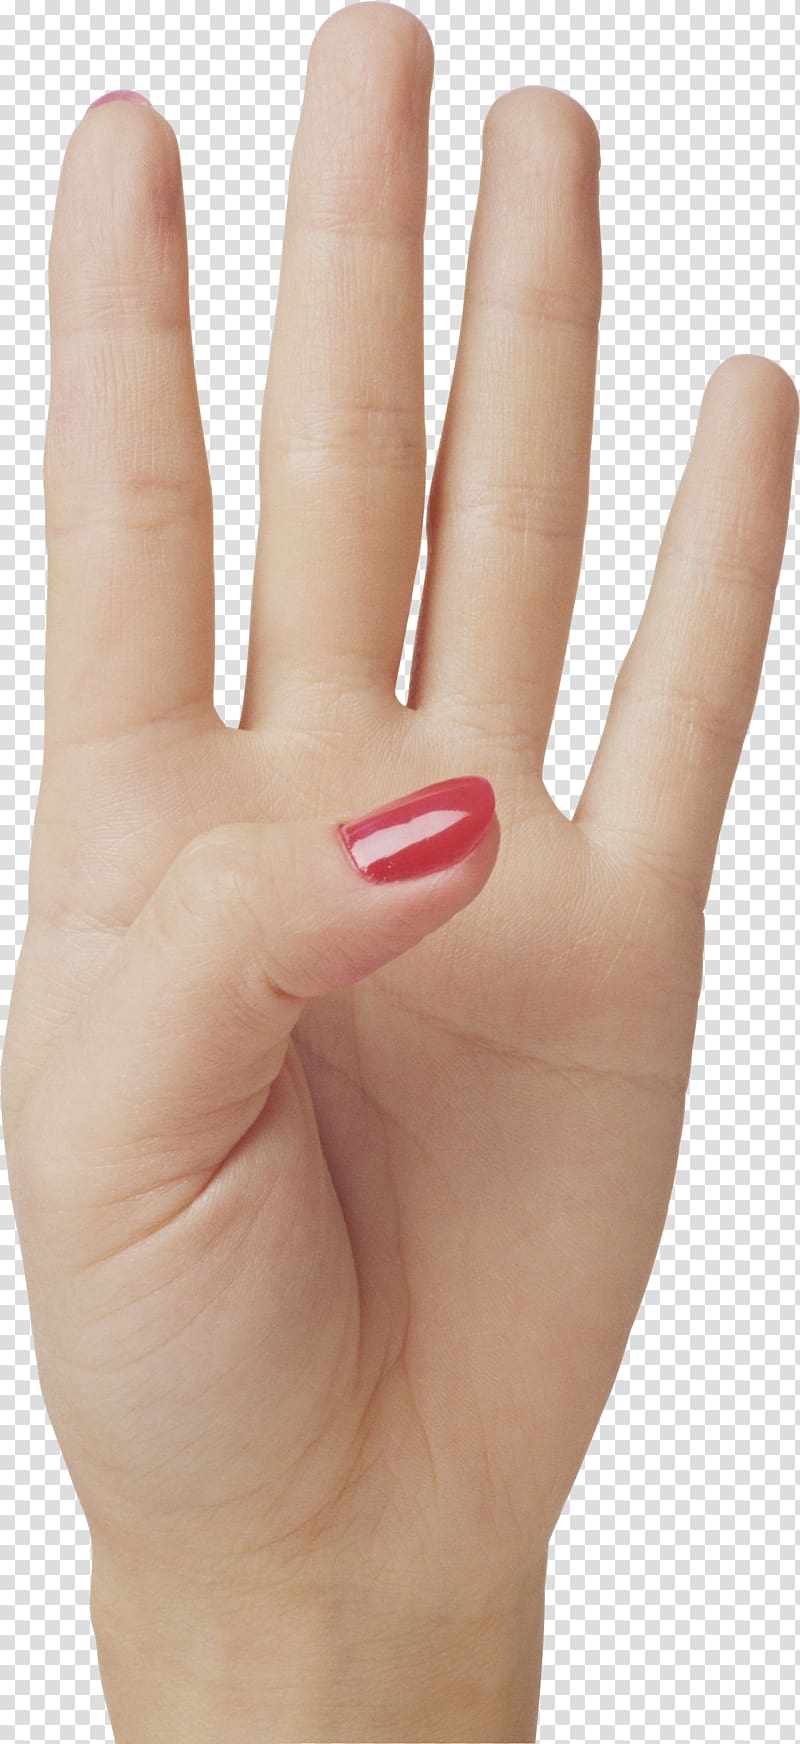 Hand Chunk Computer file, Hands , hand free transparent background PNG clipart